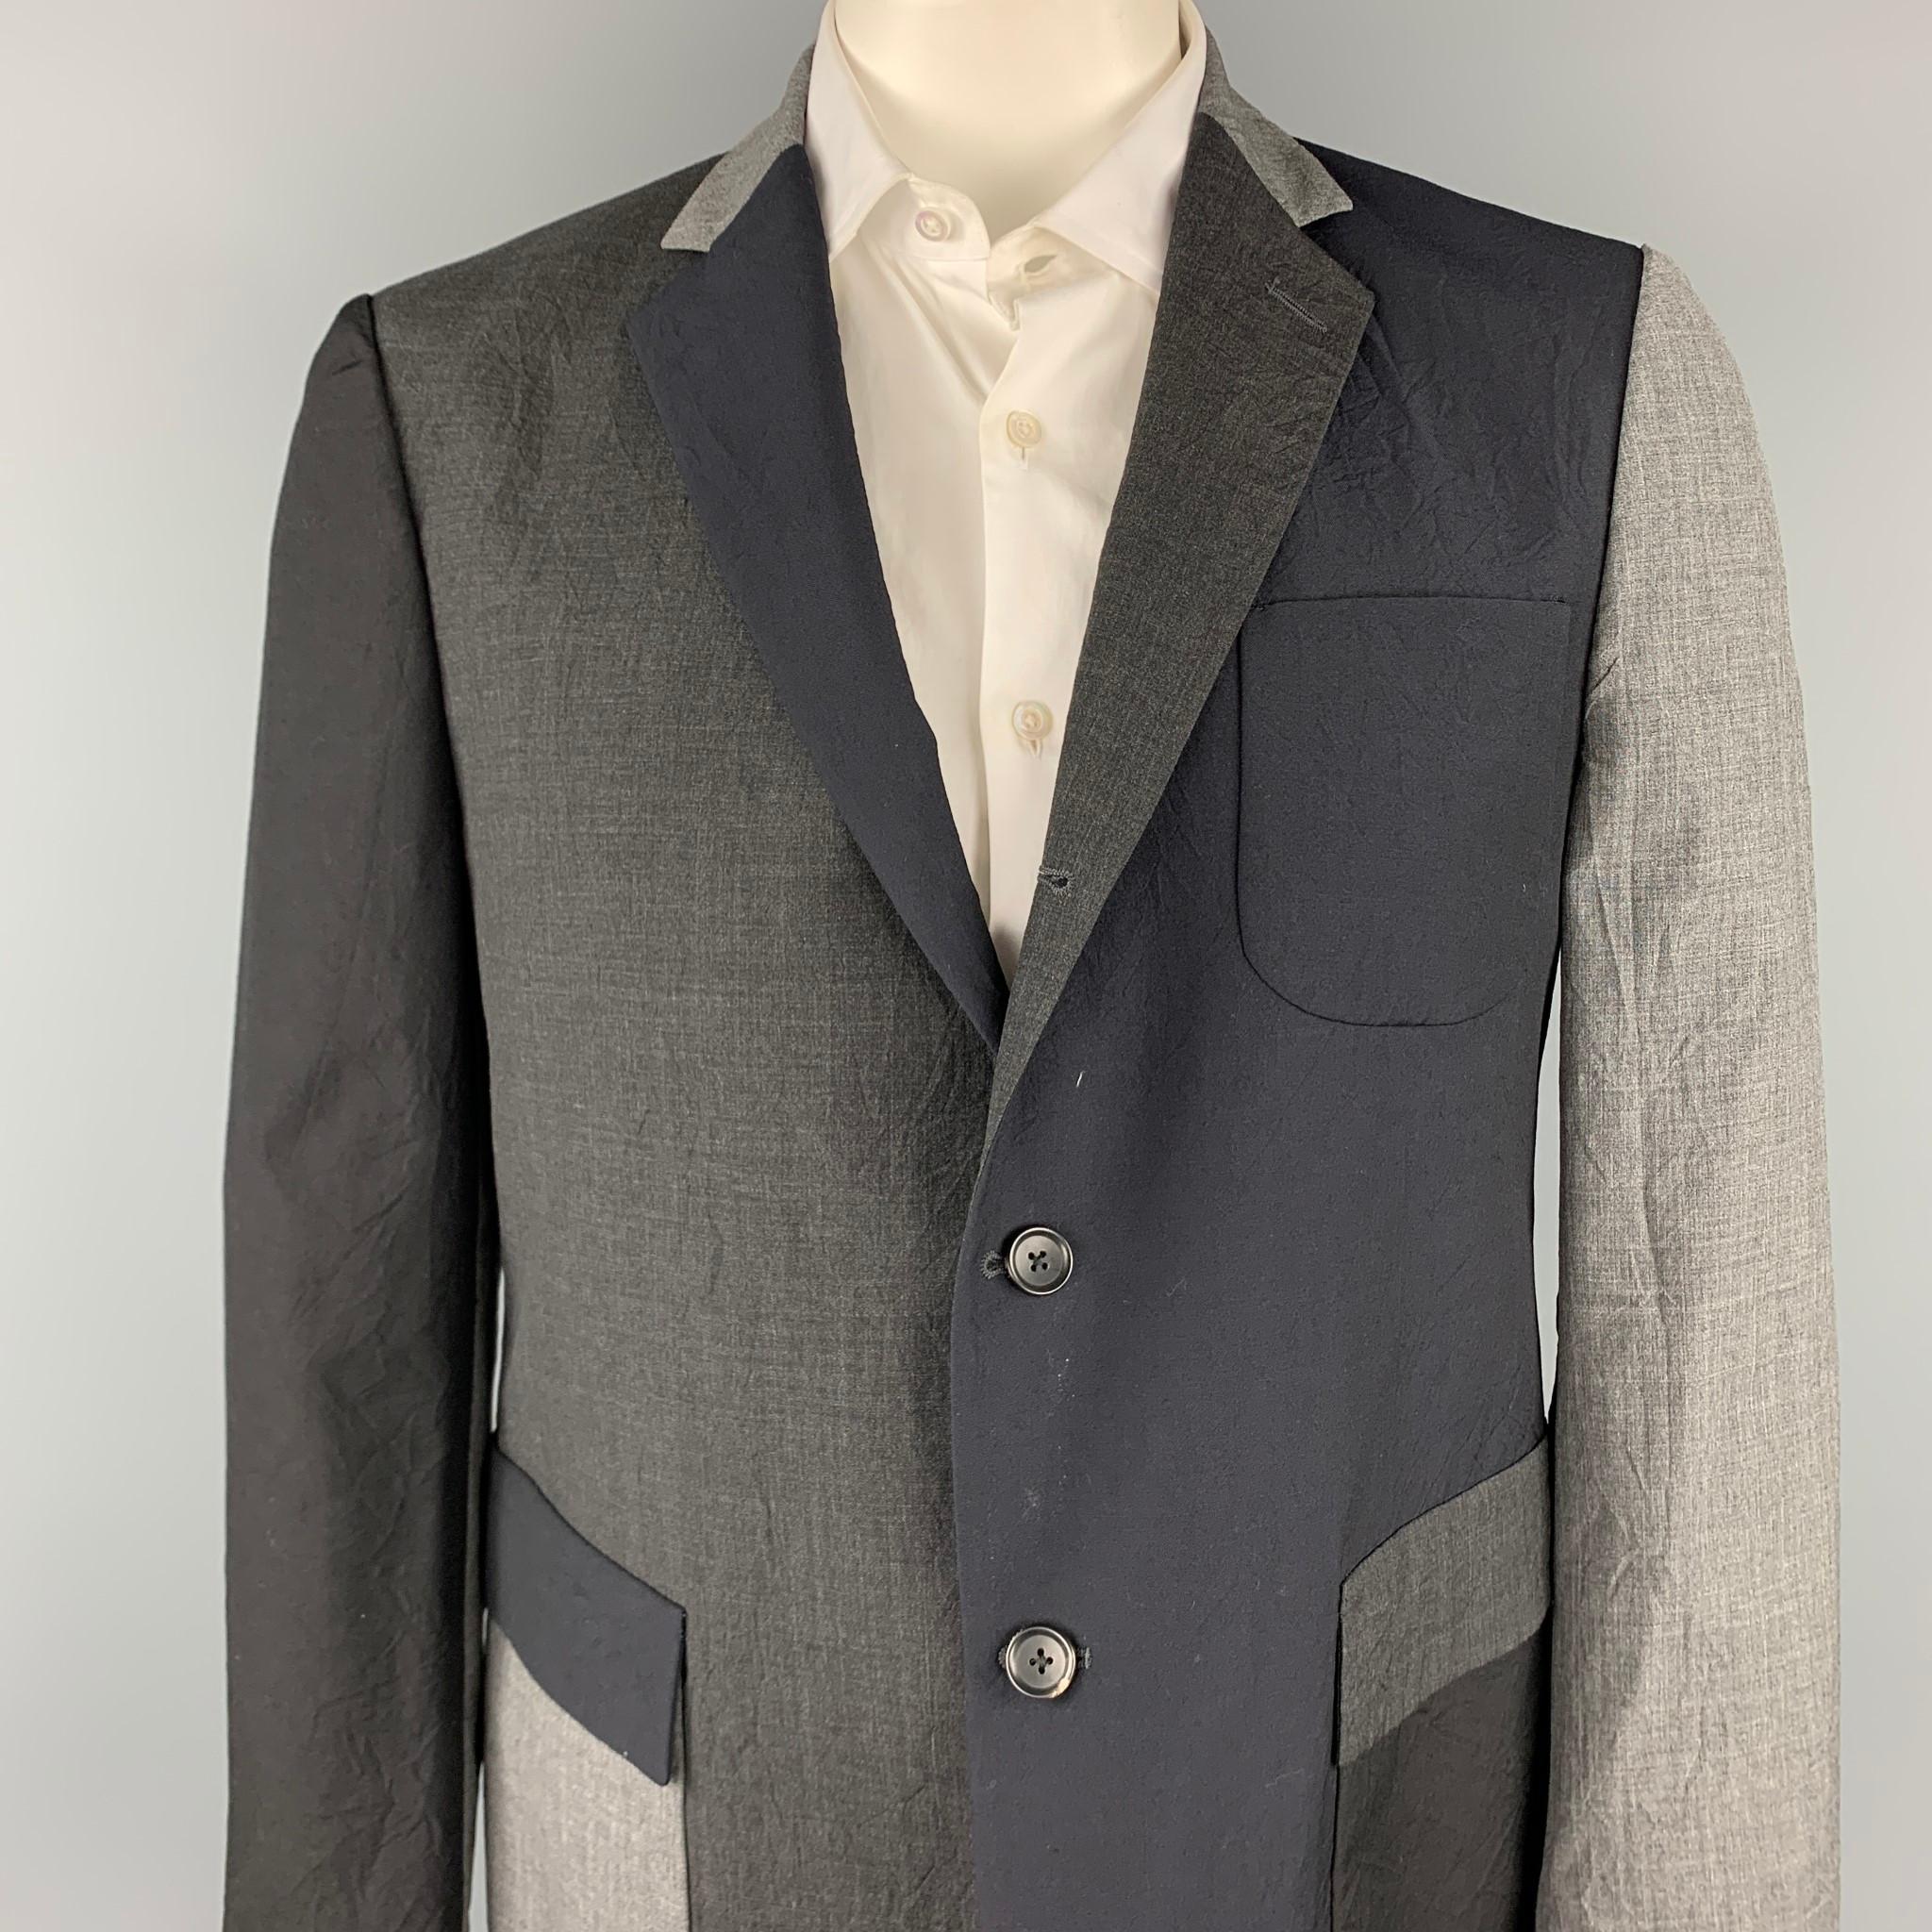 WOOSTER + LARDINI sport coat comes in a black & grey color block with a half liner featuring a notch lapel, flap pockets, and a three button closure. Made in Italy.

Very Good Pre-Owned Condition.
Marked: IT 54

Measurements:

Shoulder: 18.5